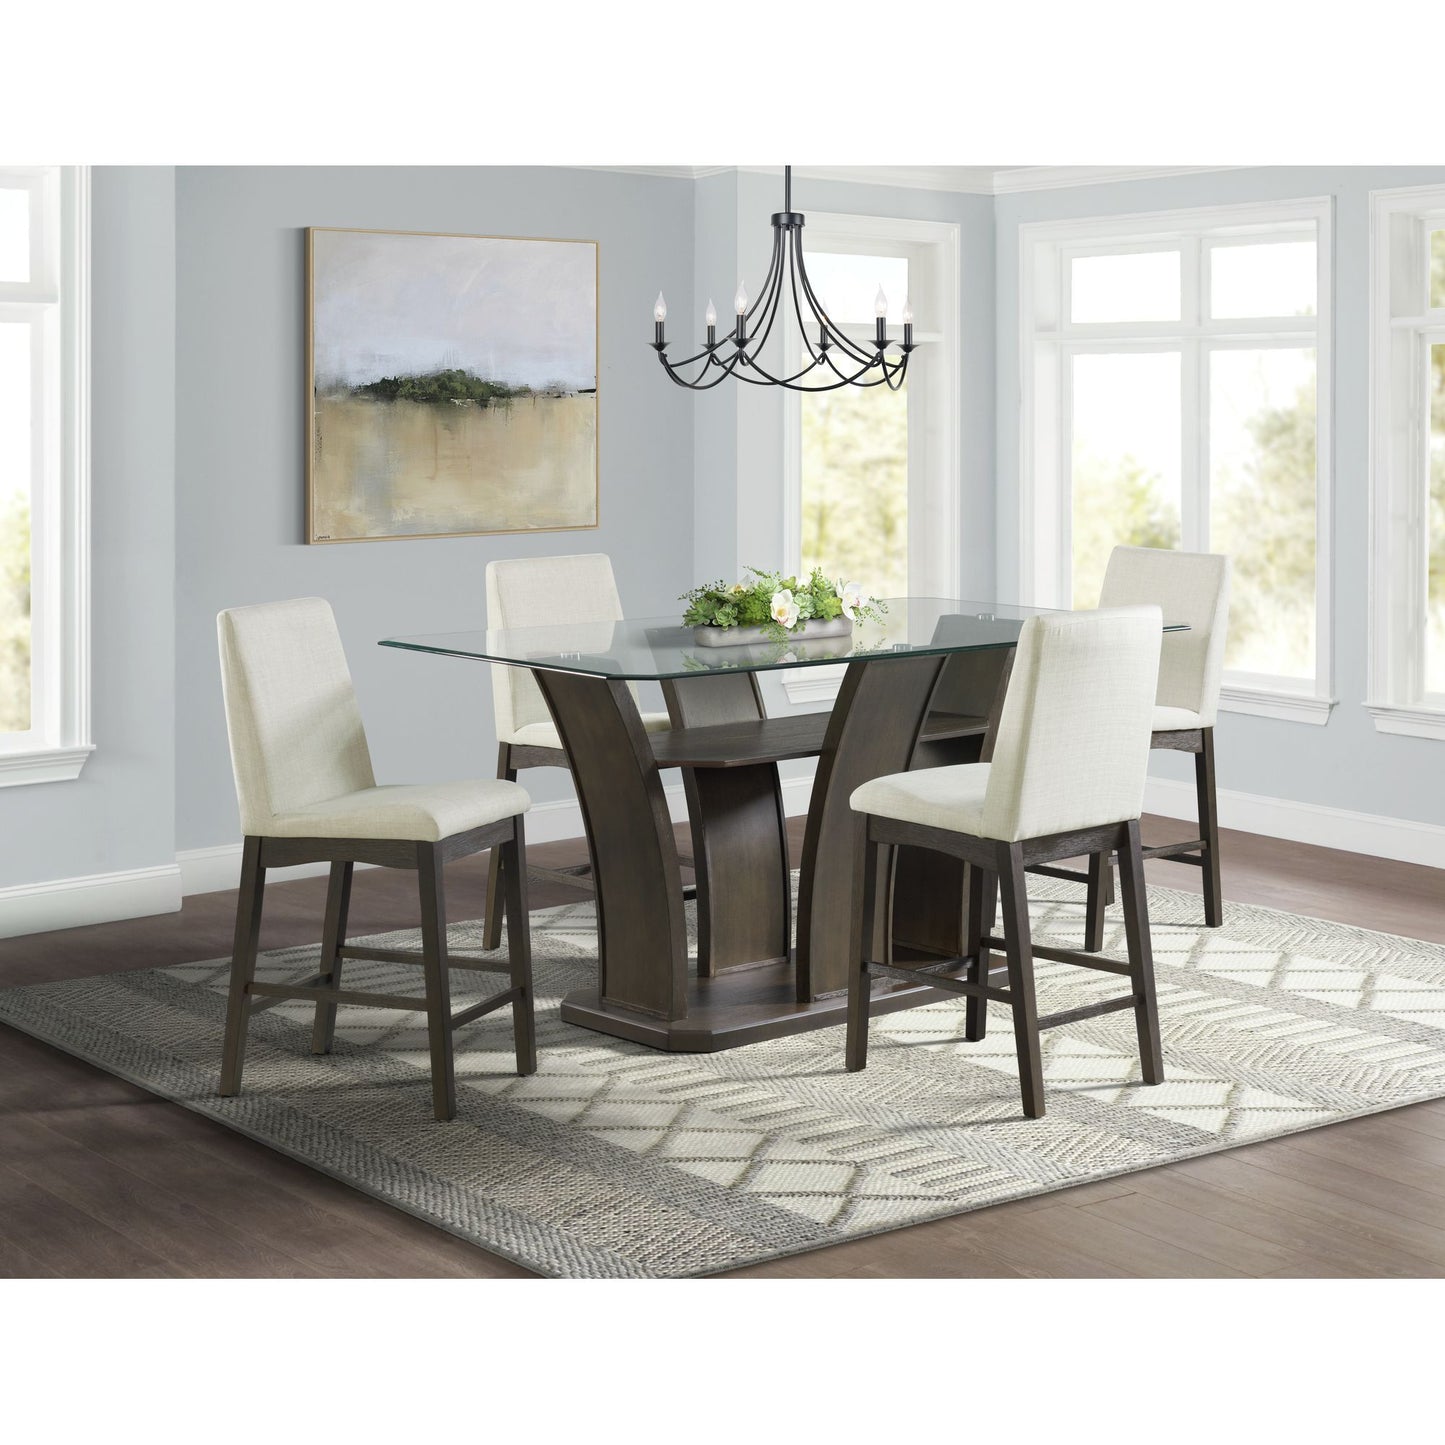 Dapper - Rectangular Counter Dining 5 Piece Set-Table And Four Chairs - Walnut